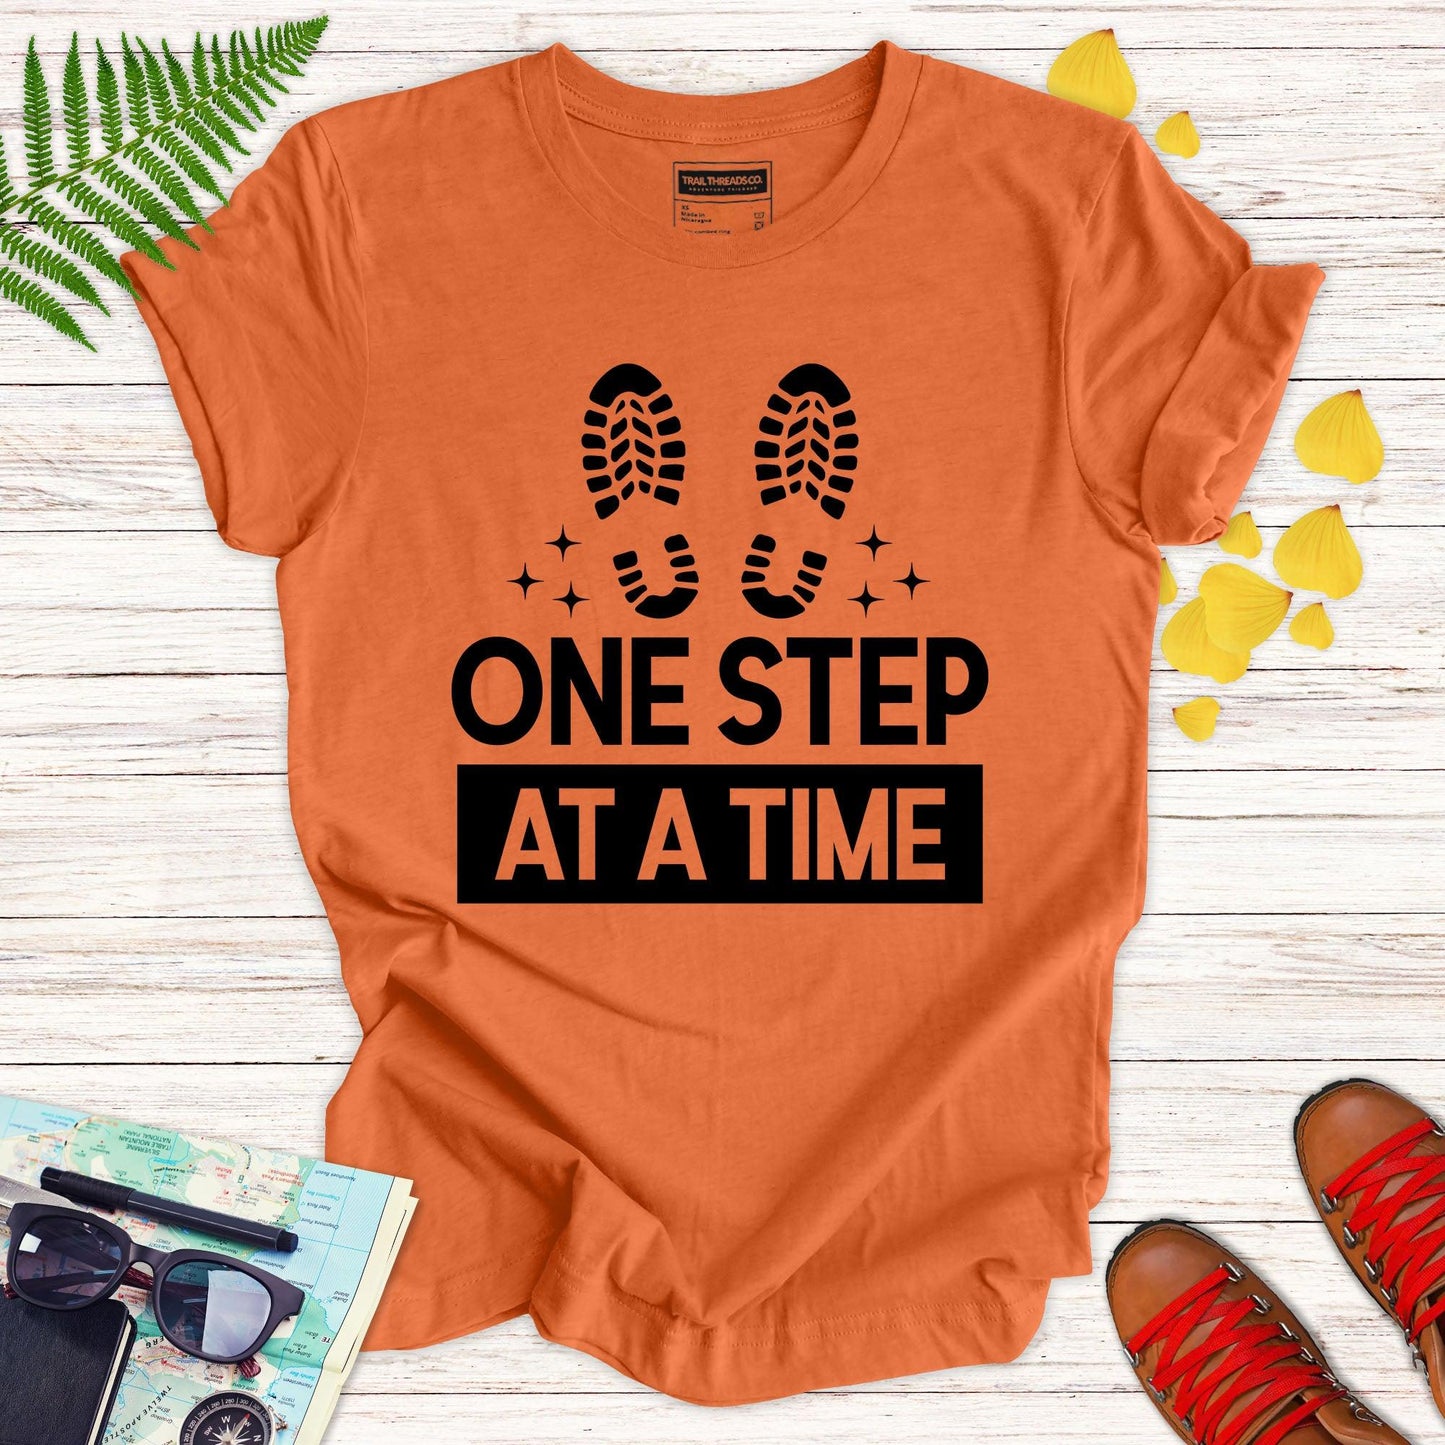 One Step at a Time T-shirt - Trail Threads Co. Limited